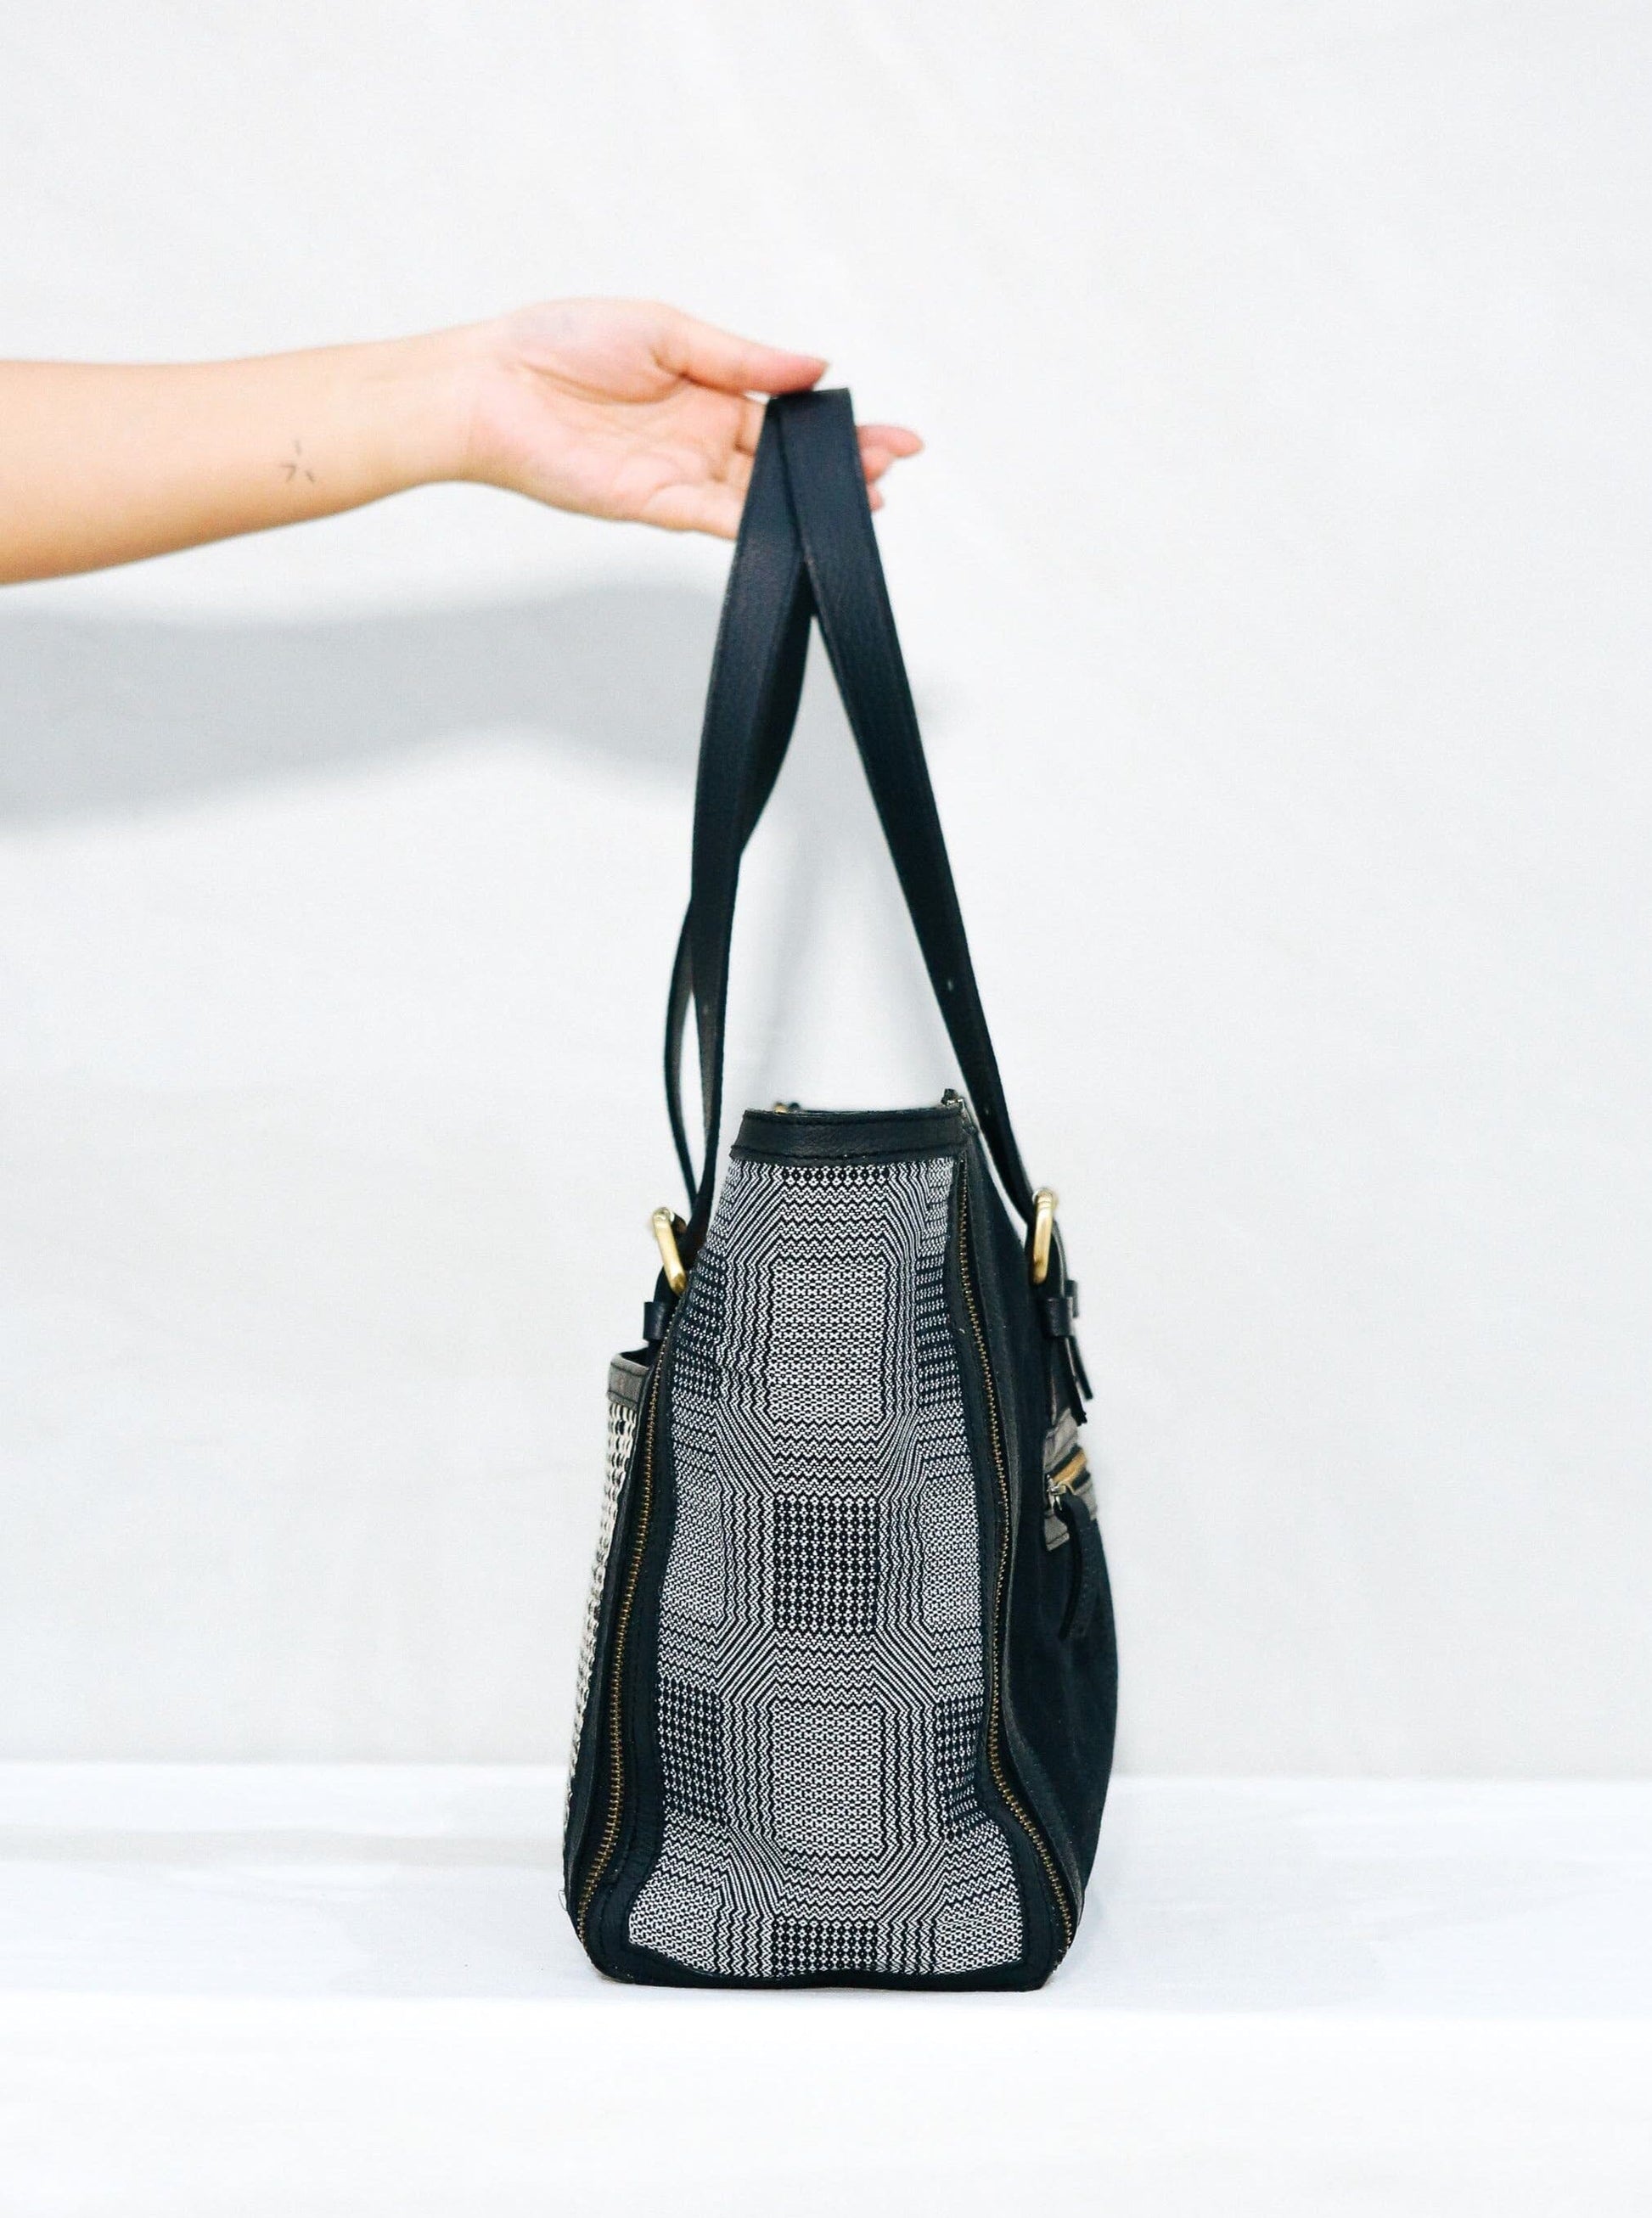 [R2R x DoiTung] Two-Way Tote Fashion Rags2Riches